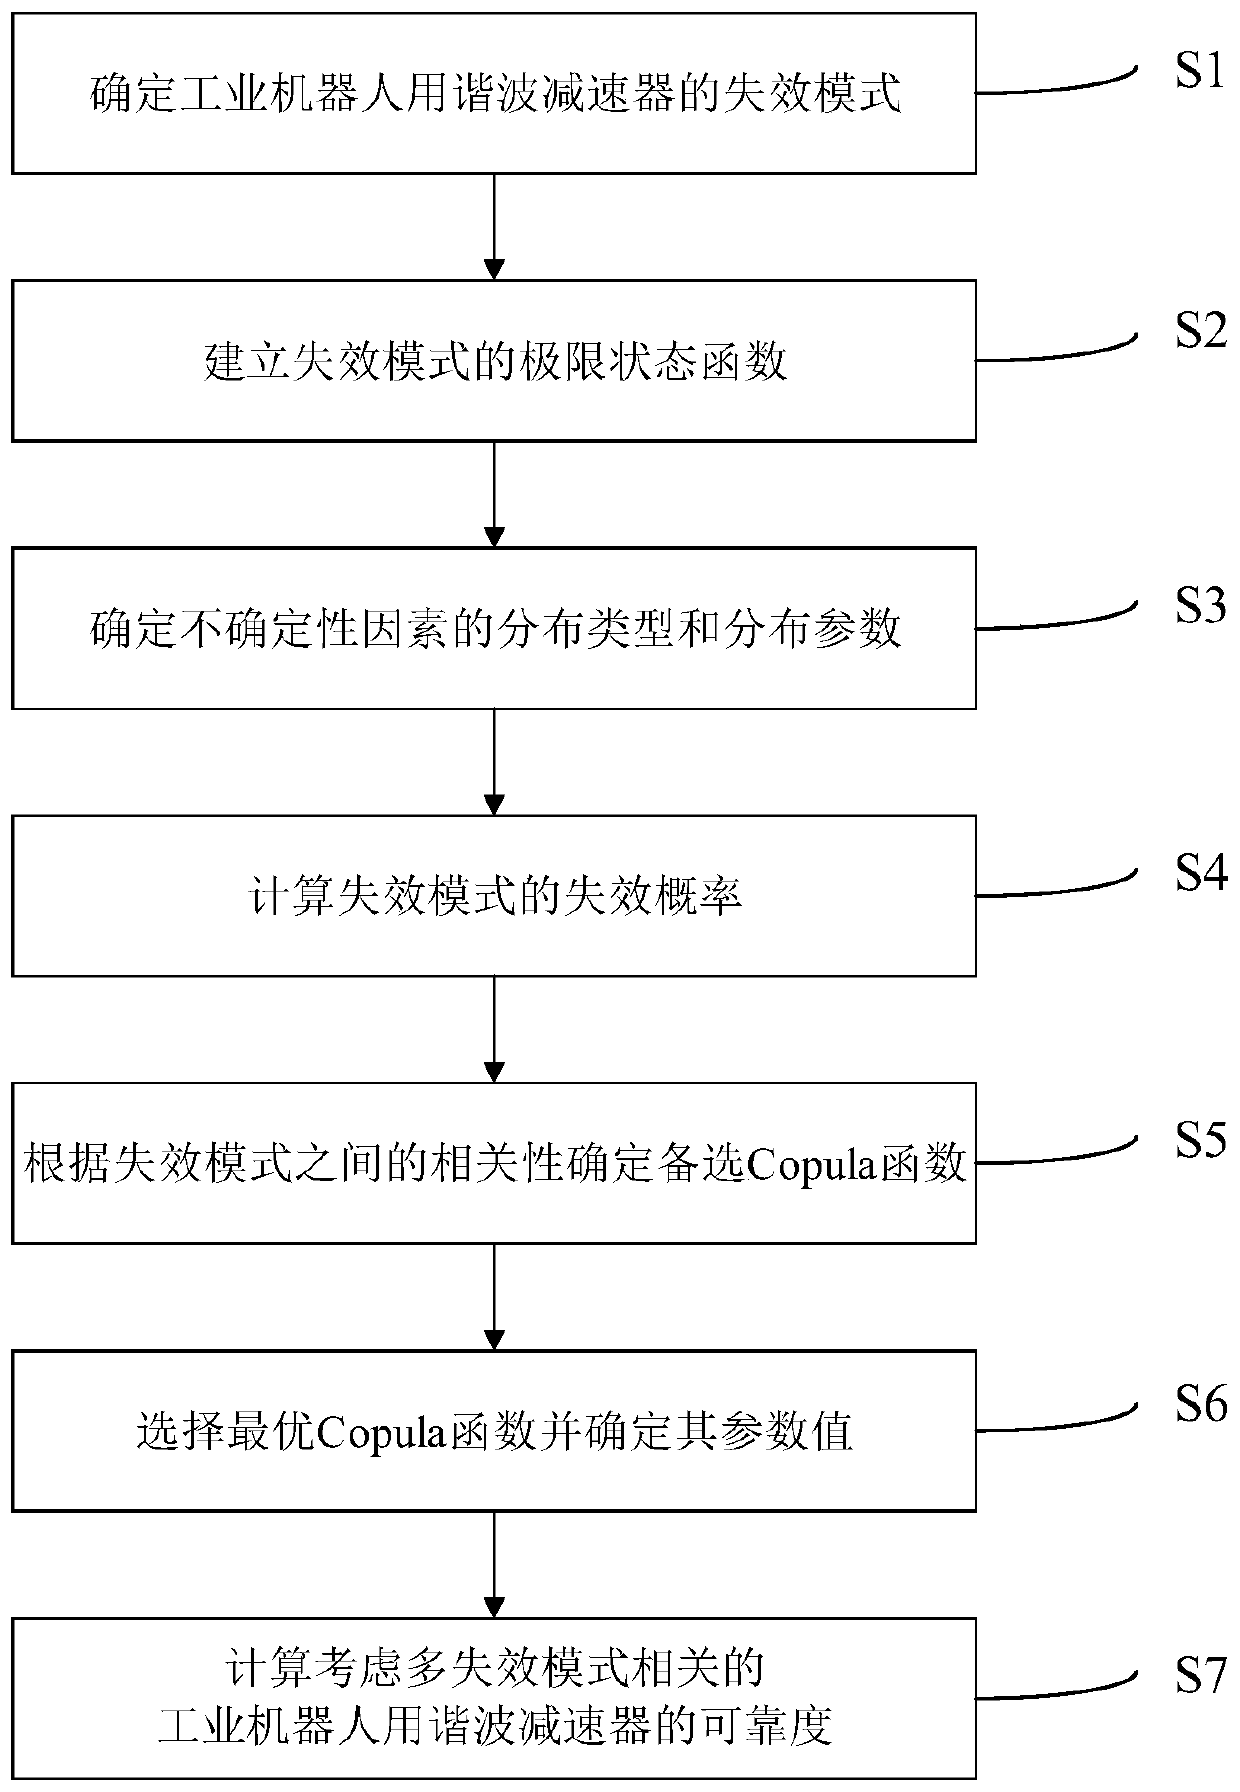 Copula function-based reliability analysis method for a harmonic reducer for an industrial robot